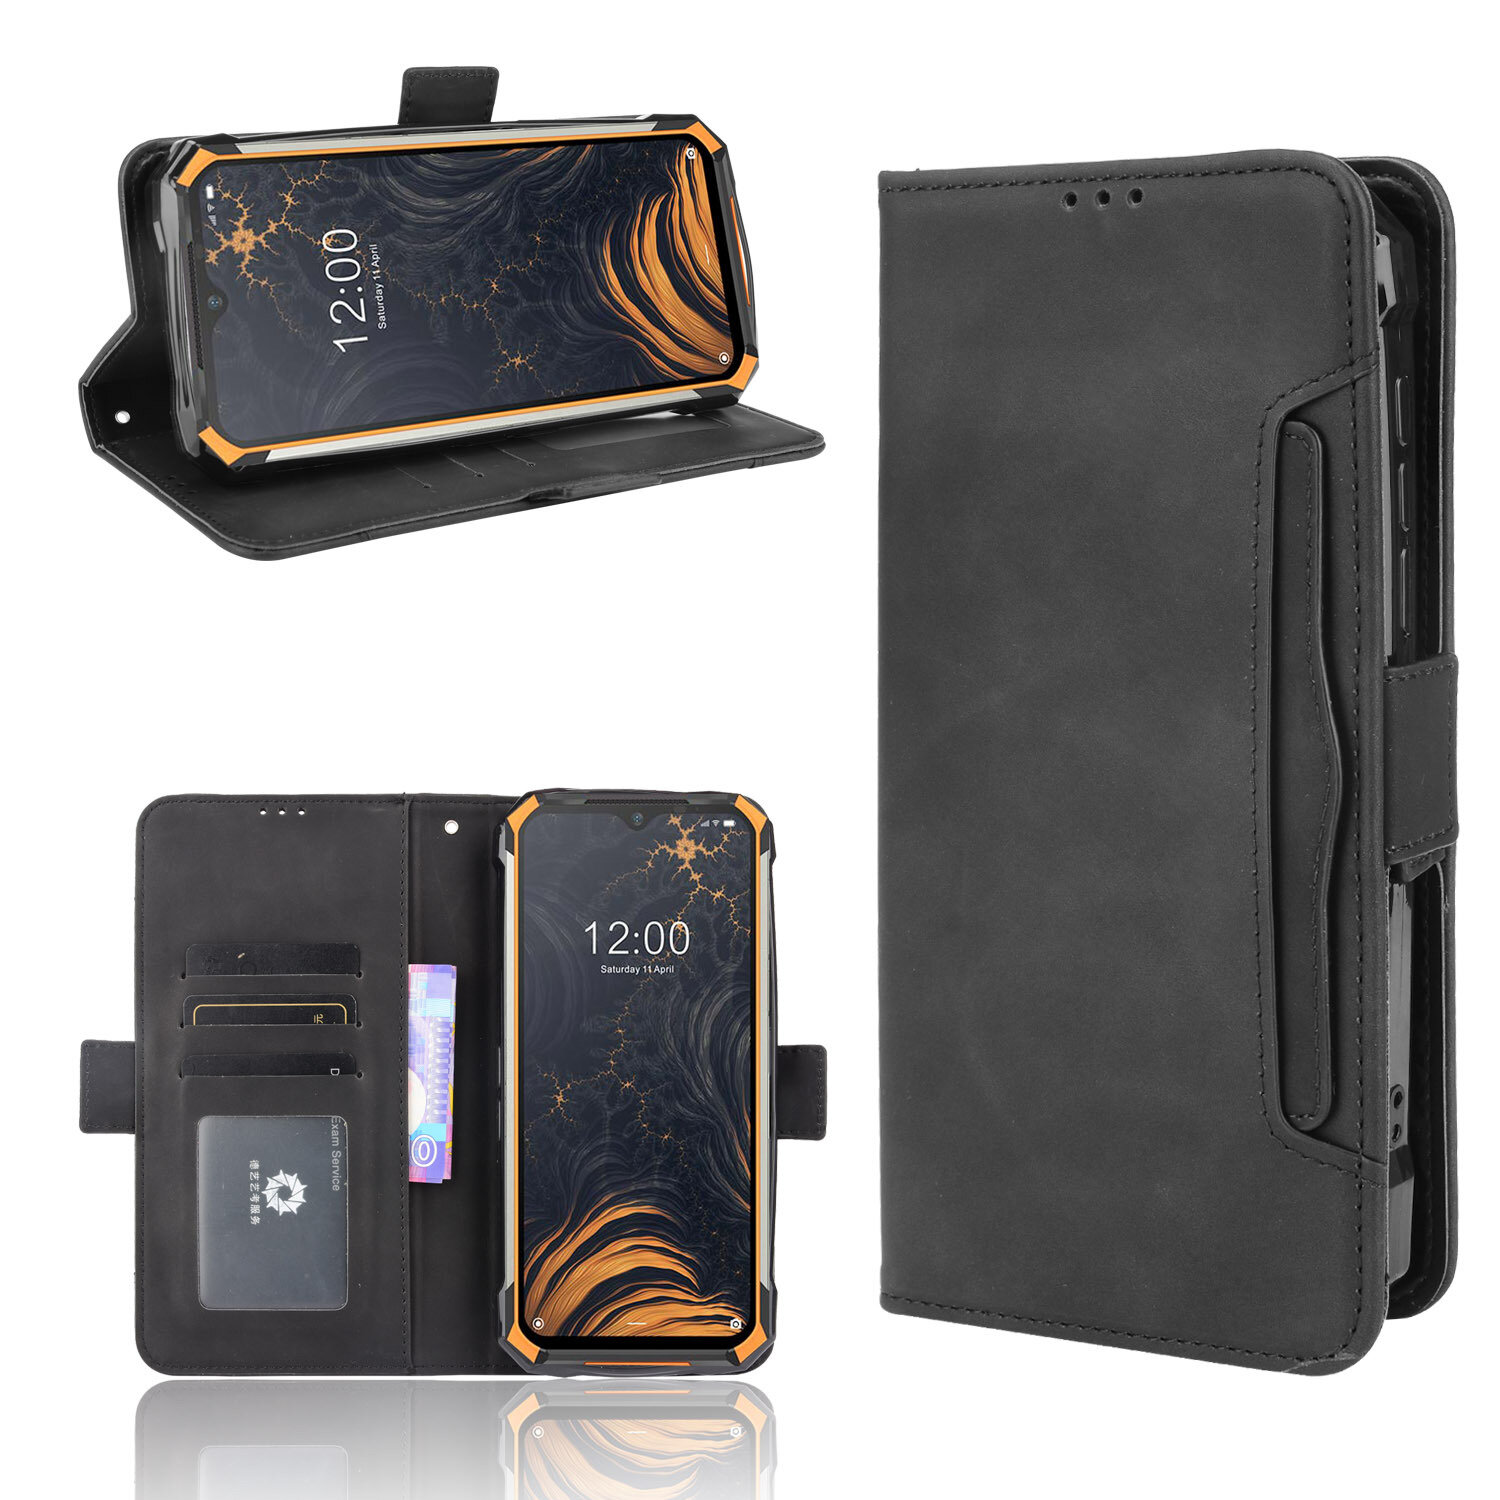 Bakeey for Doogee S88 Pro/ Doogee S88 Plus Case Magnetic Flip with Multiple Card Slot Wallet Folding